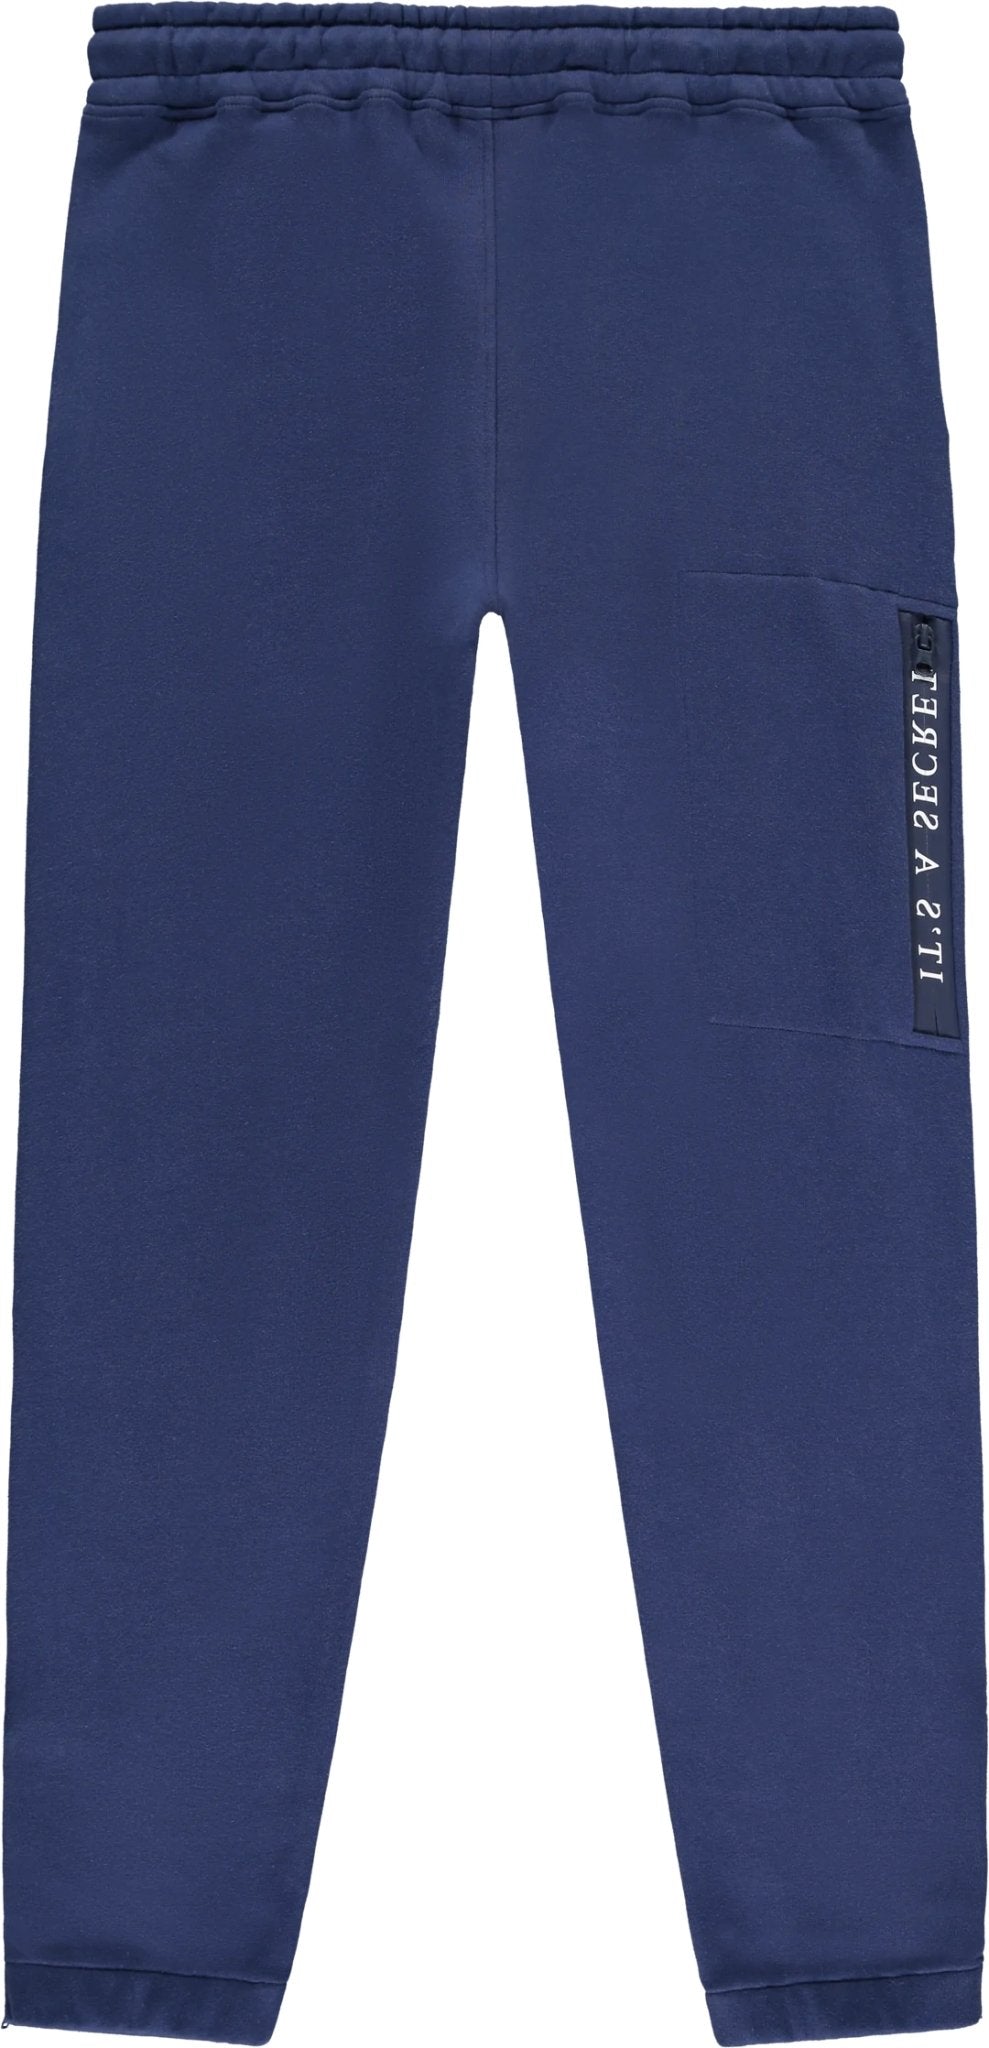 TRAPSTAR CHENILLE DECODED 2.0 HOODED TRACKSUIT - MEDIEVAL BLUE - Hype Locker UK